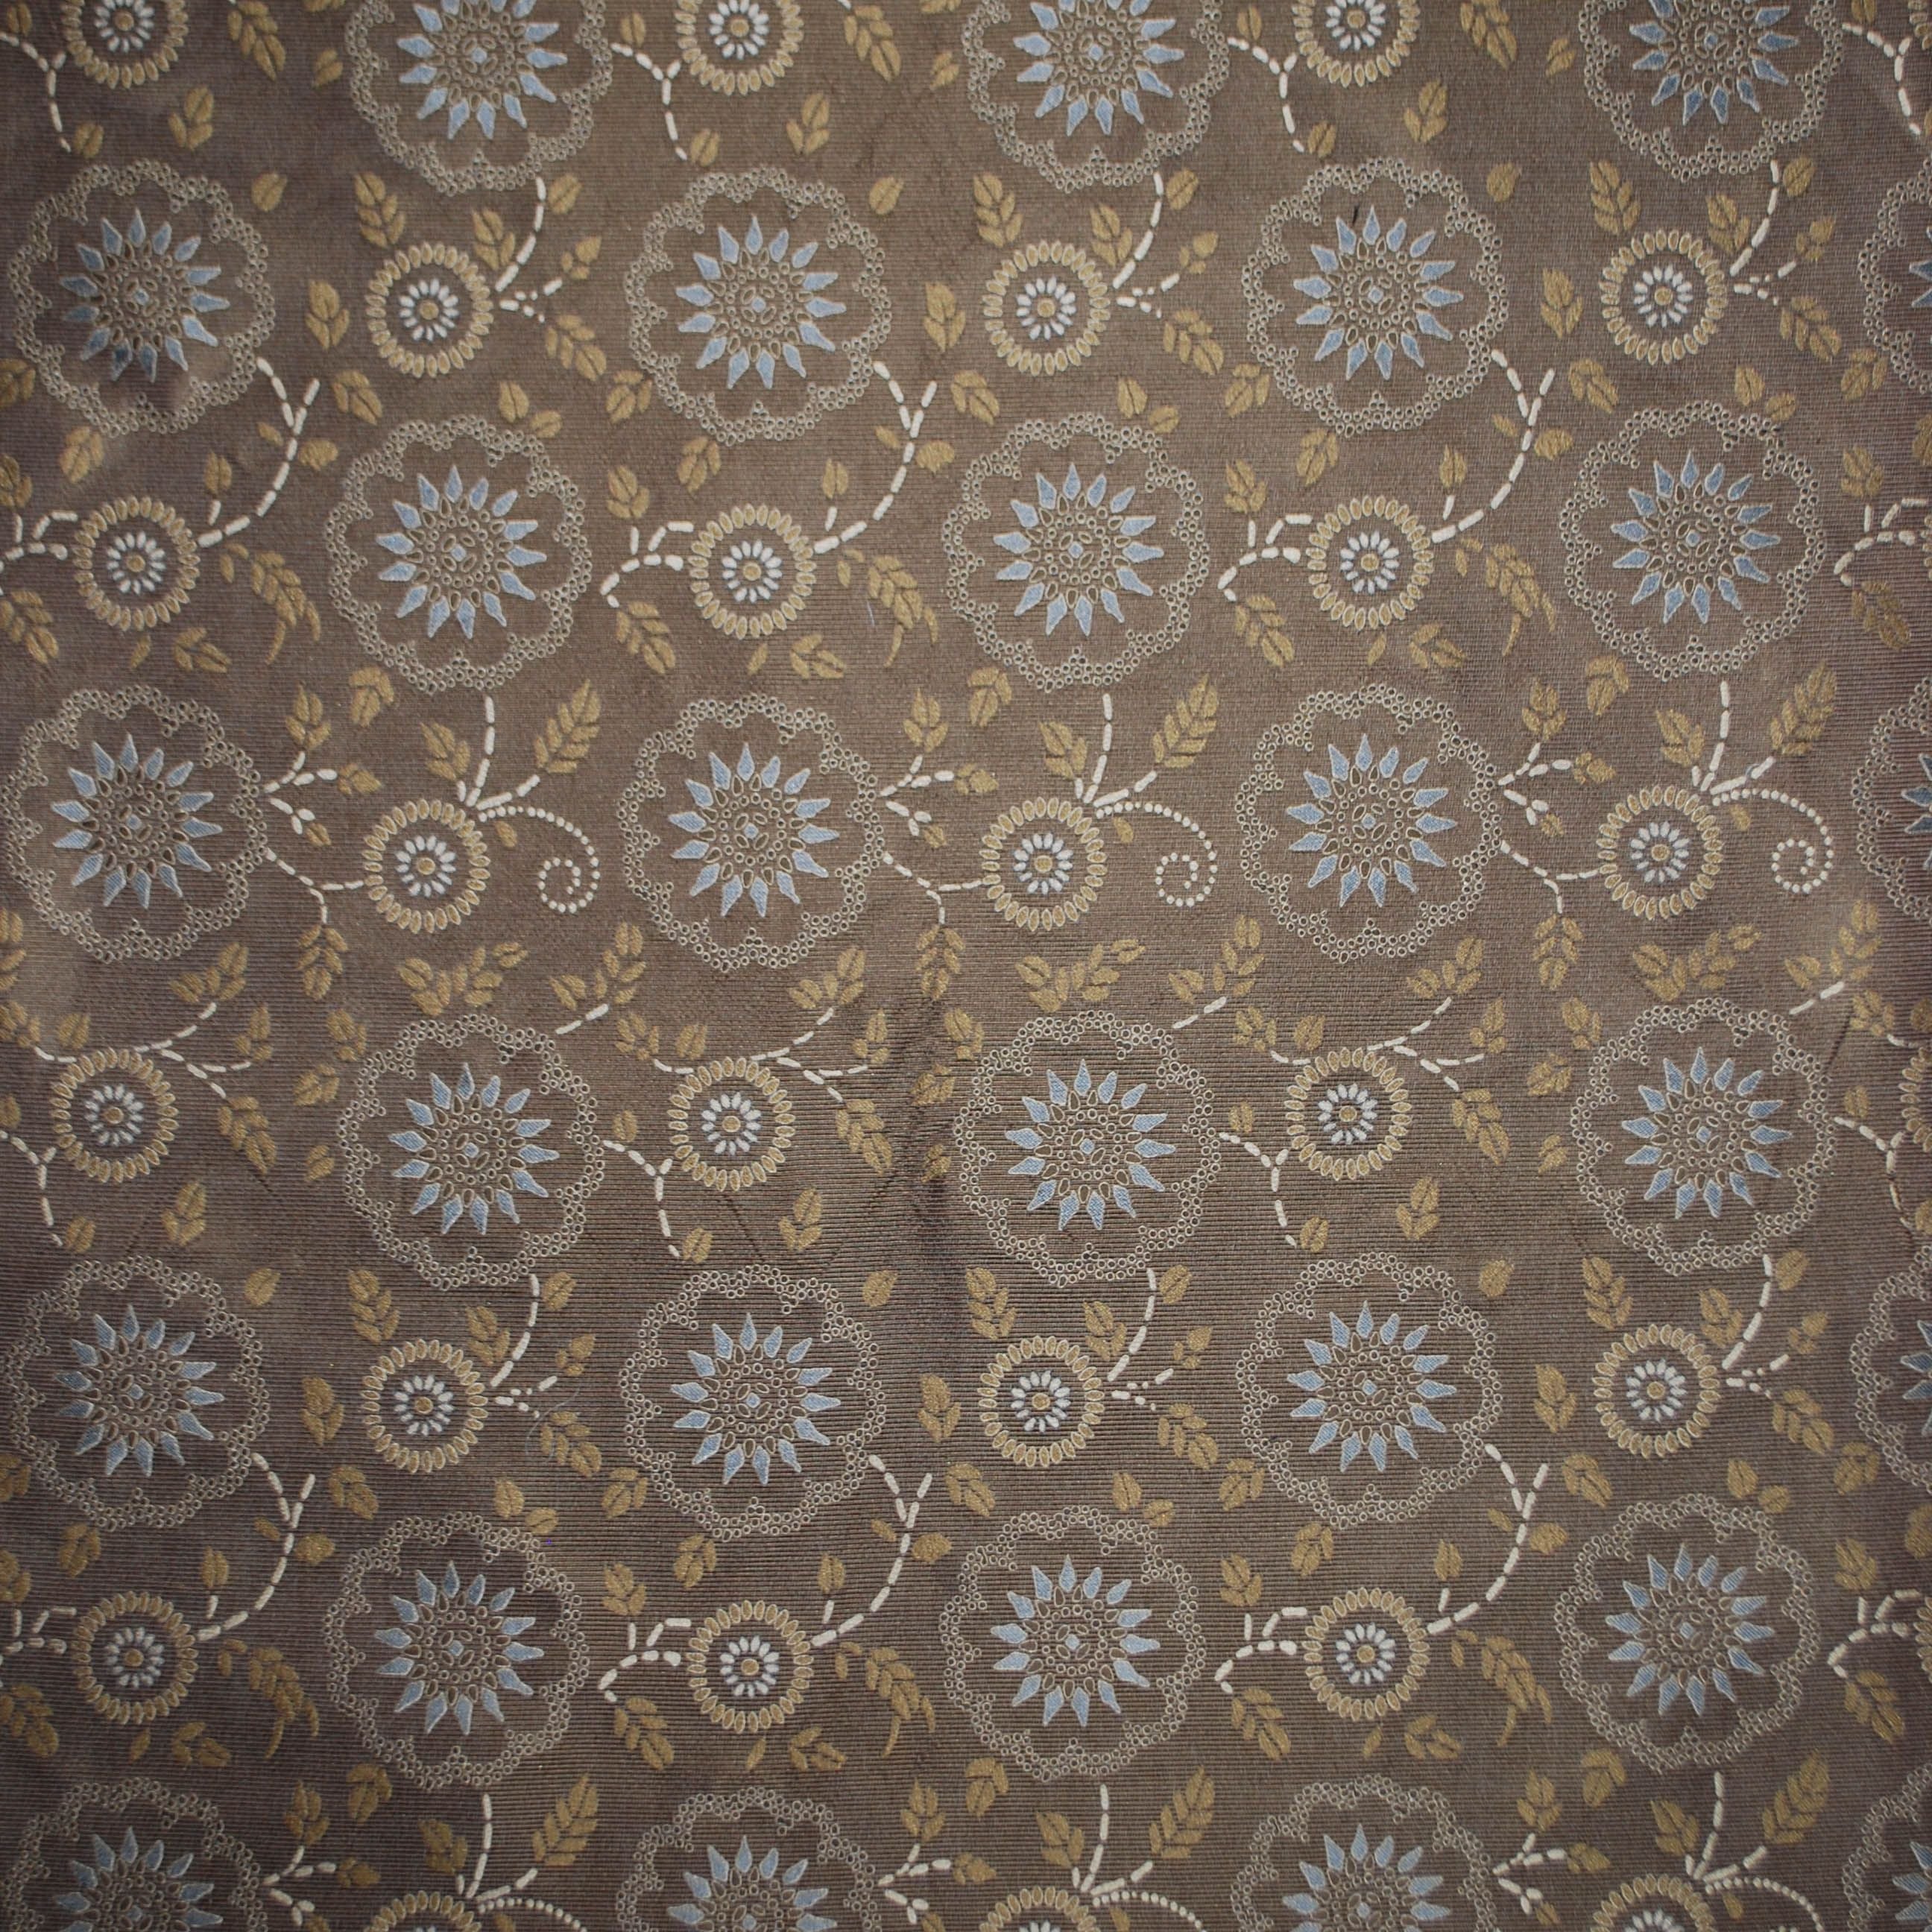 Kasumi fabric in chocolate color - pattern number ZB 0003WKE4 - by Scalamandre in the Old World Weavers collection